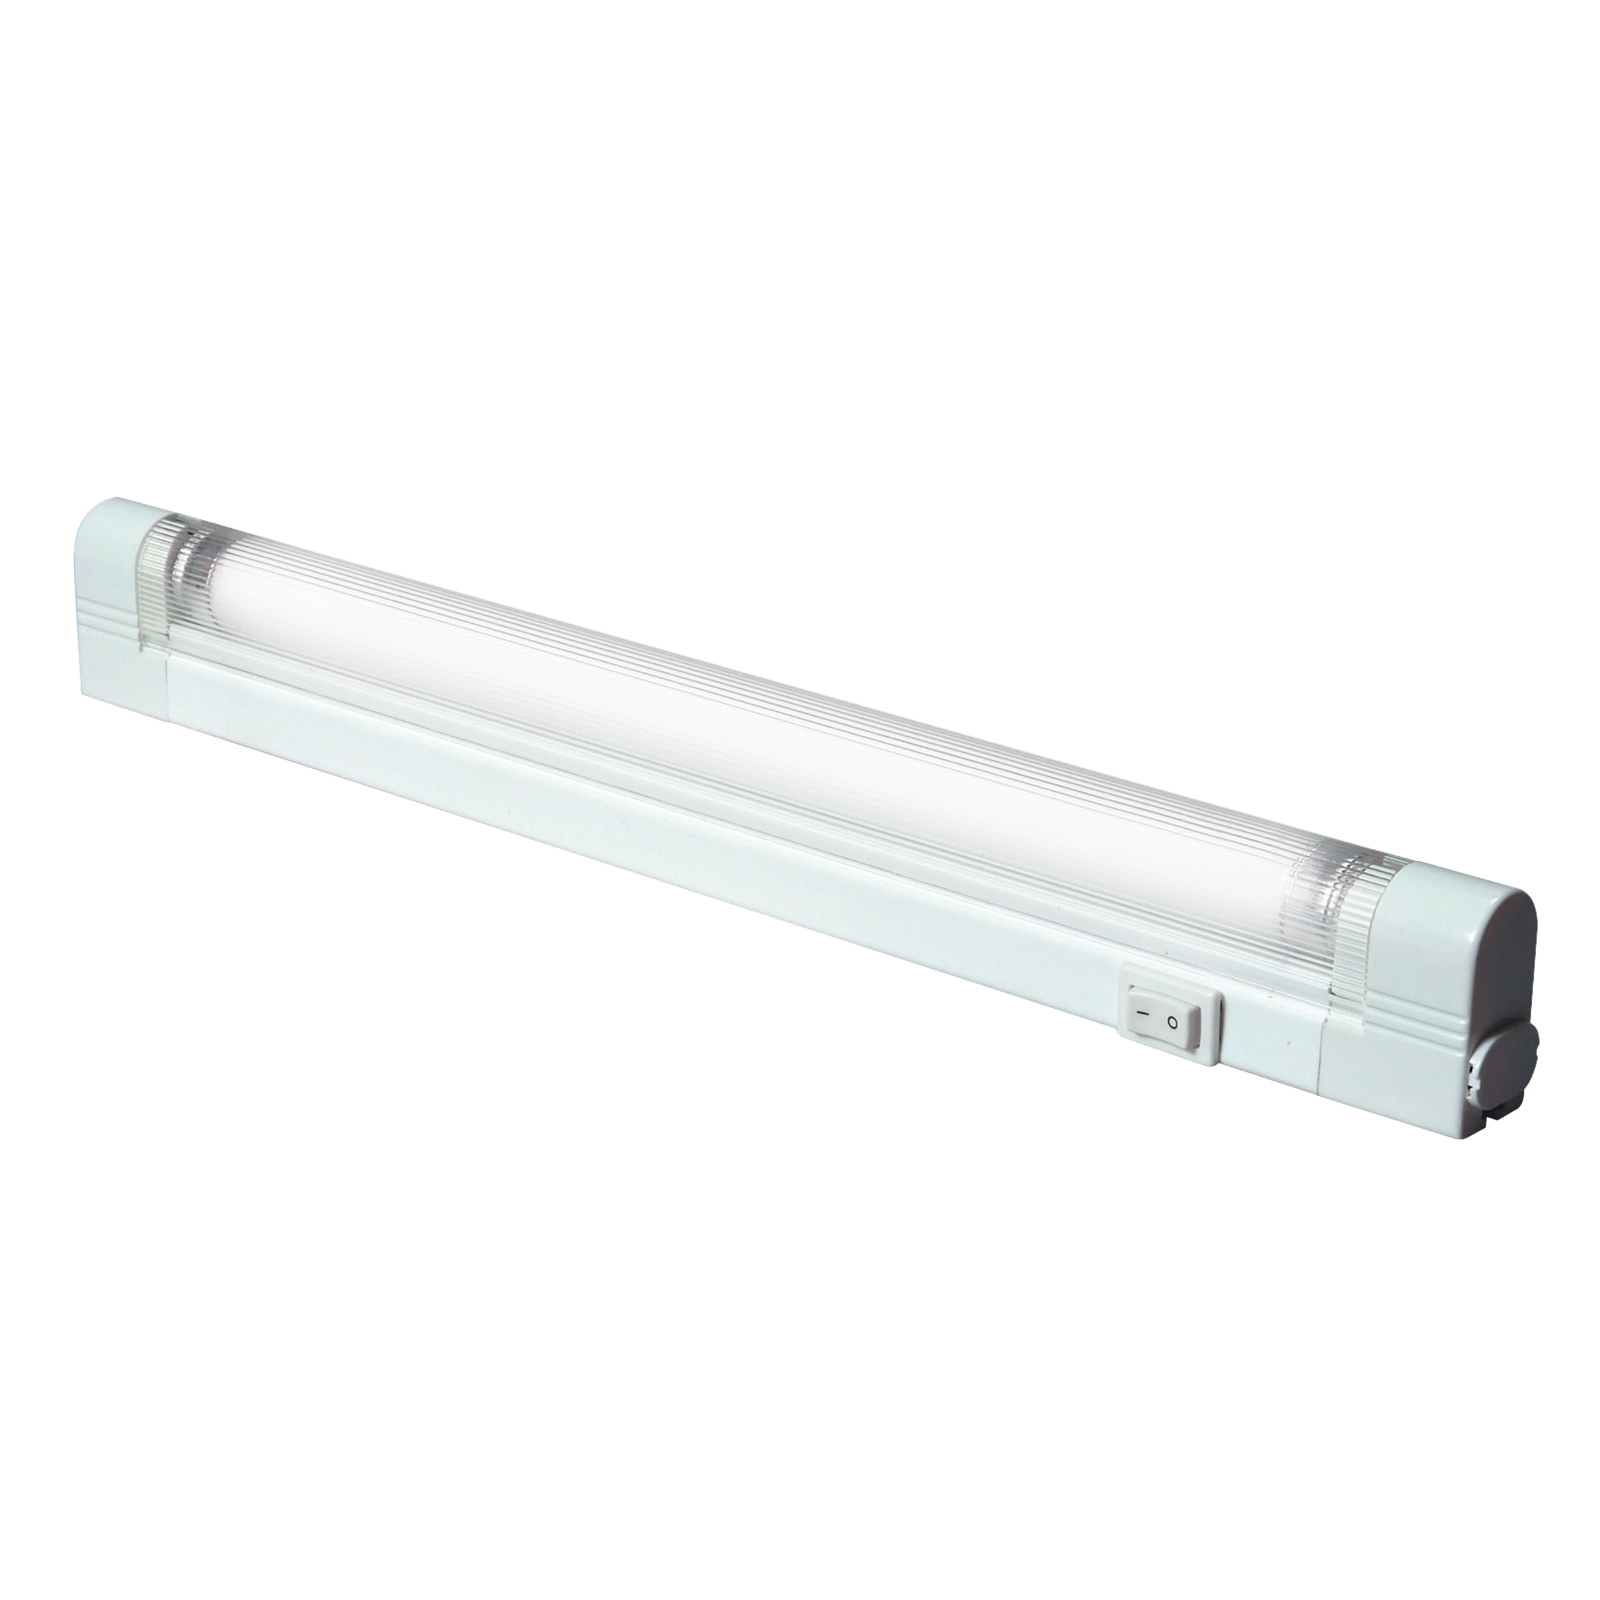 IP20 T5/G5 8W Slimline Linkable Fluorescent Fitting With Tube, Switch And Diffuser 3500K - T58 